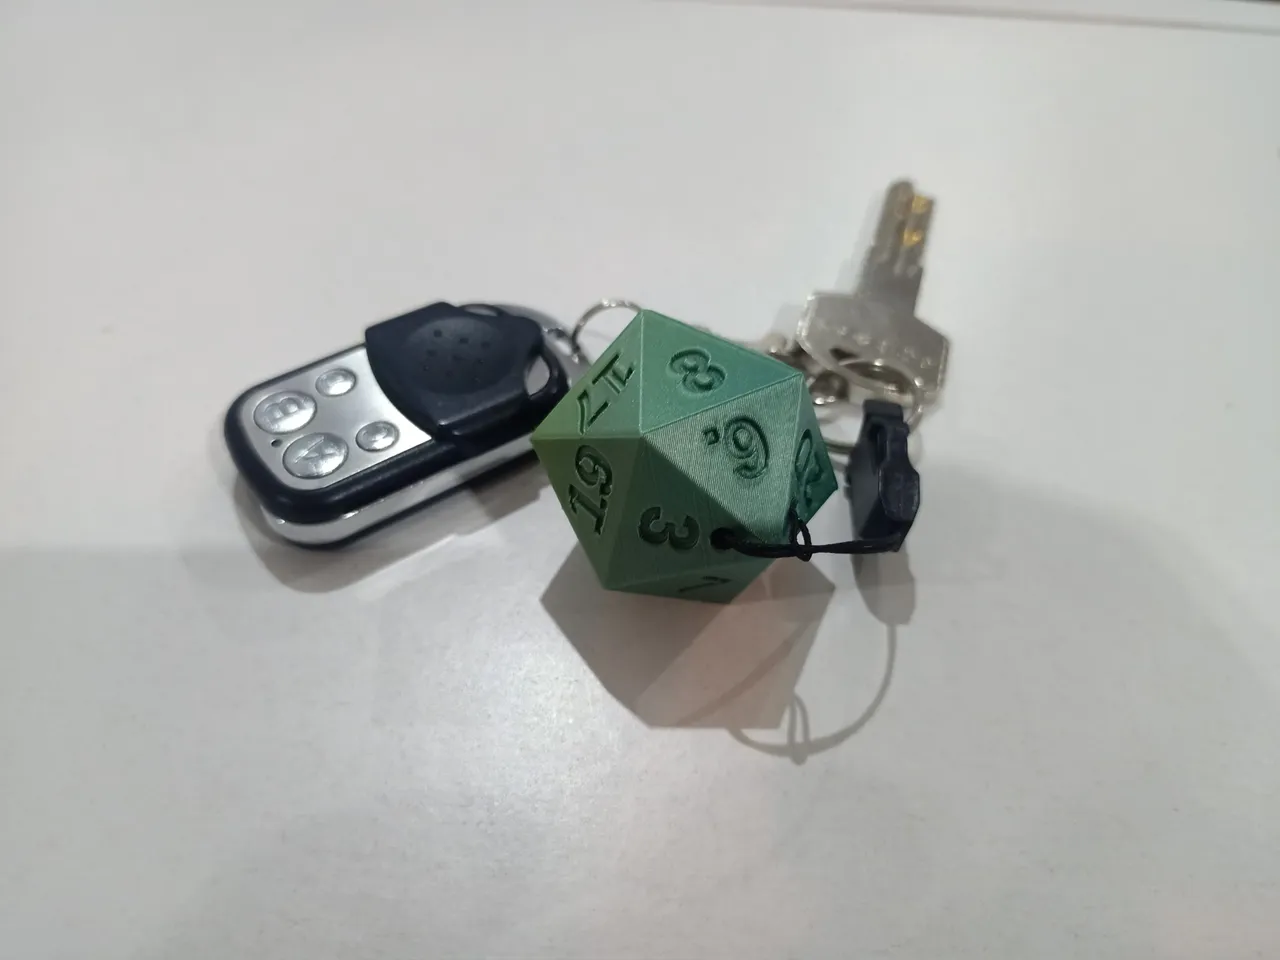 3D Printable dice keychain by AkiraPeter